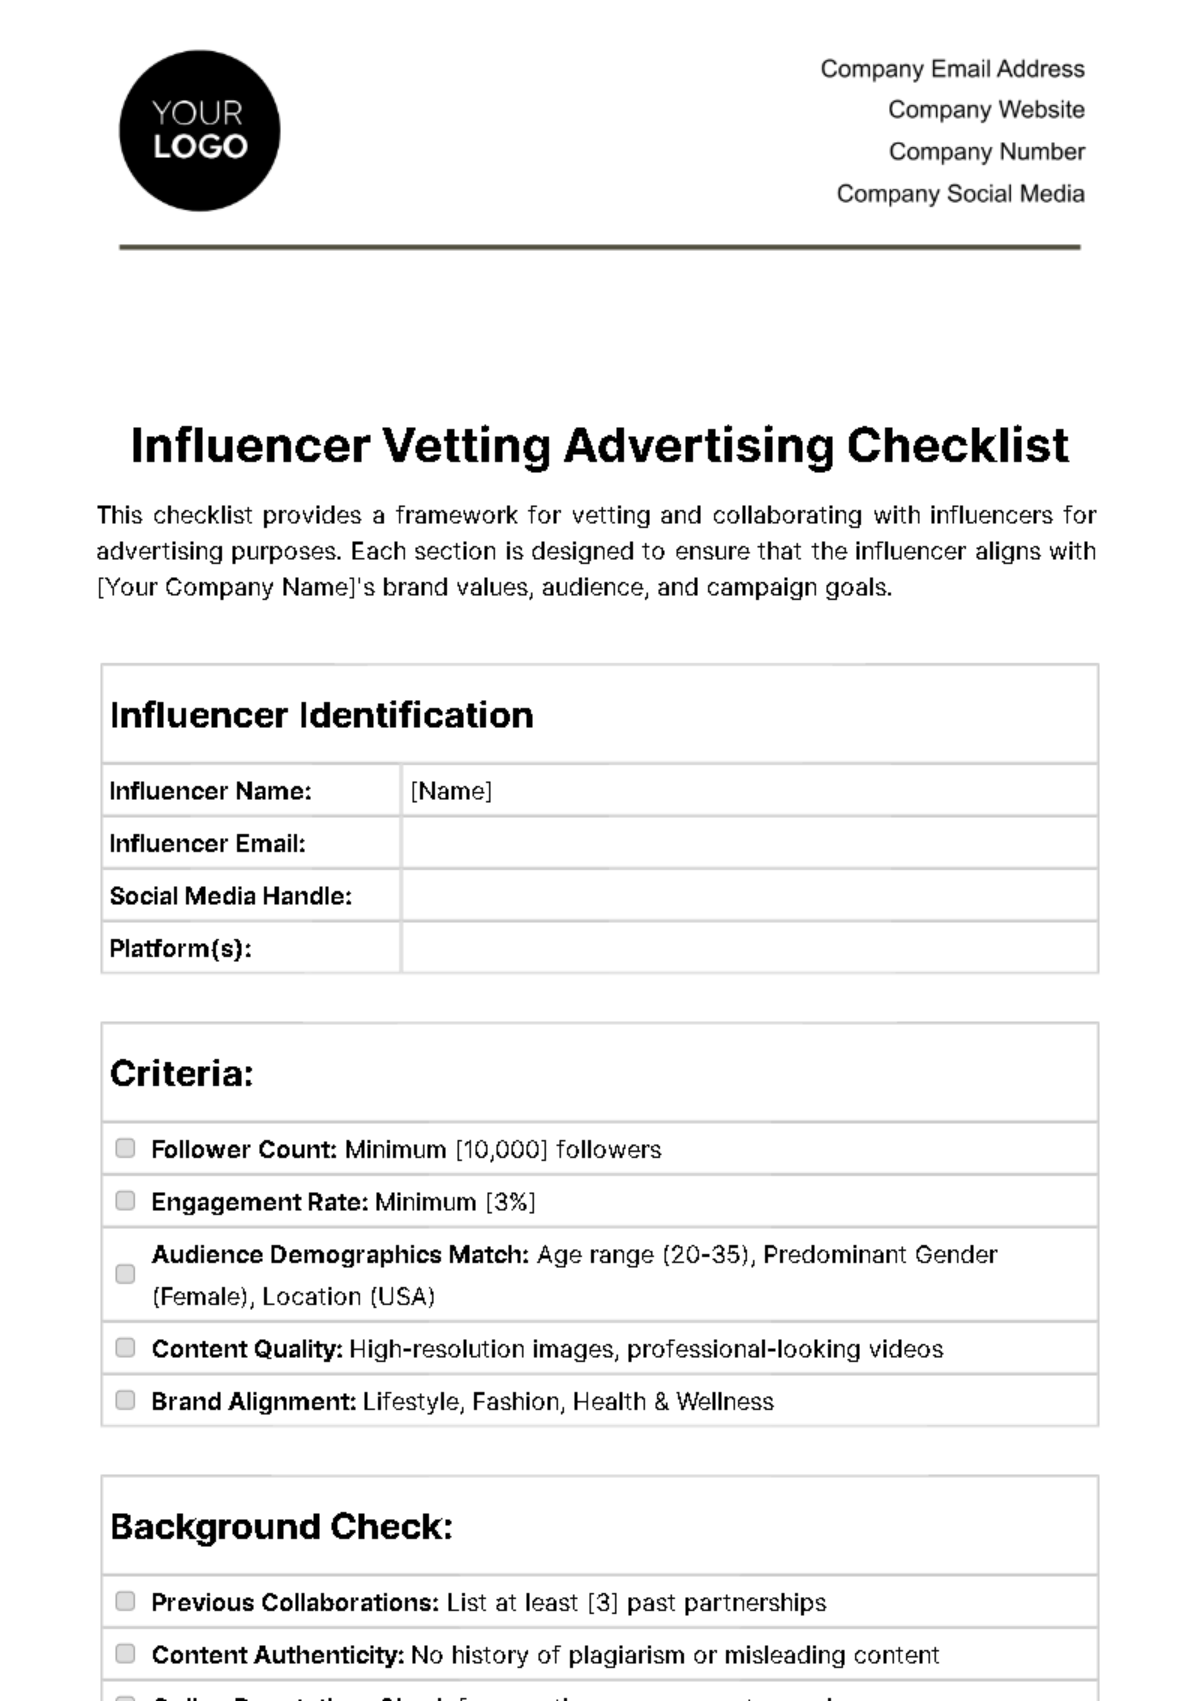 Free Influencer Vetting Advertising Checklist Template